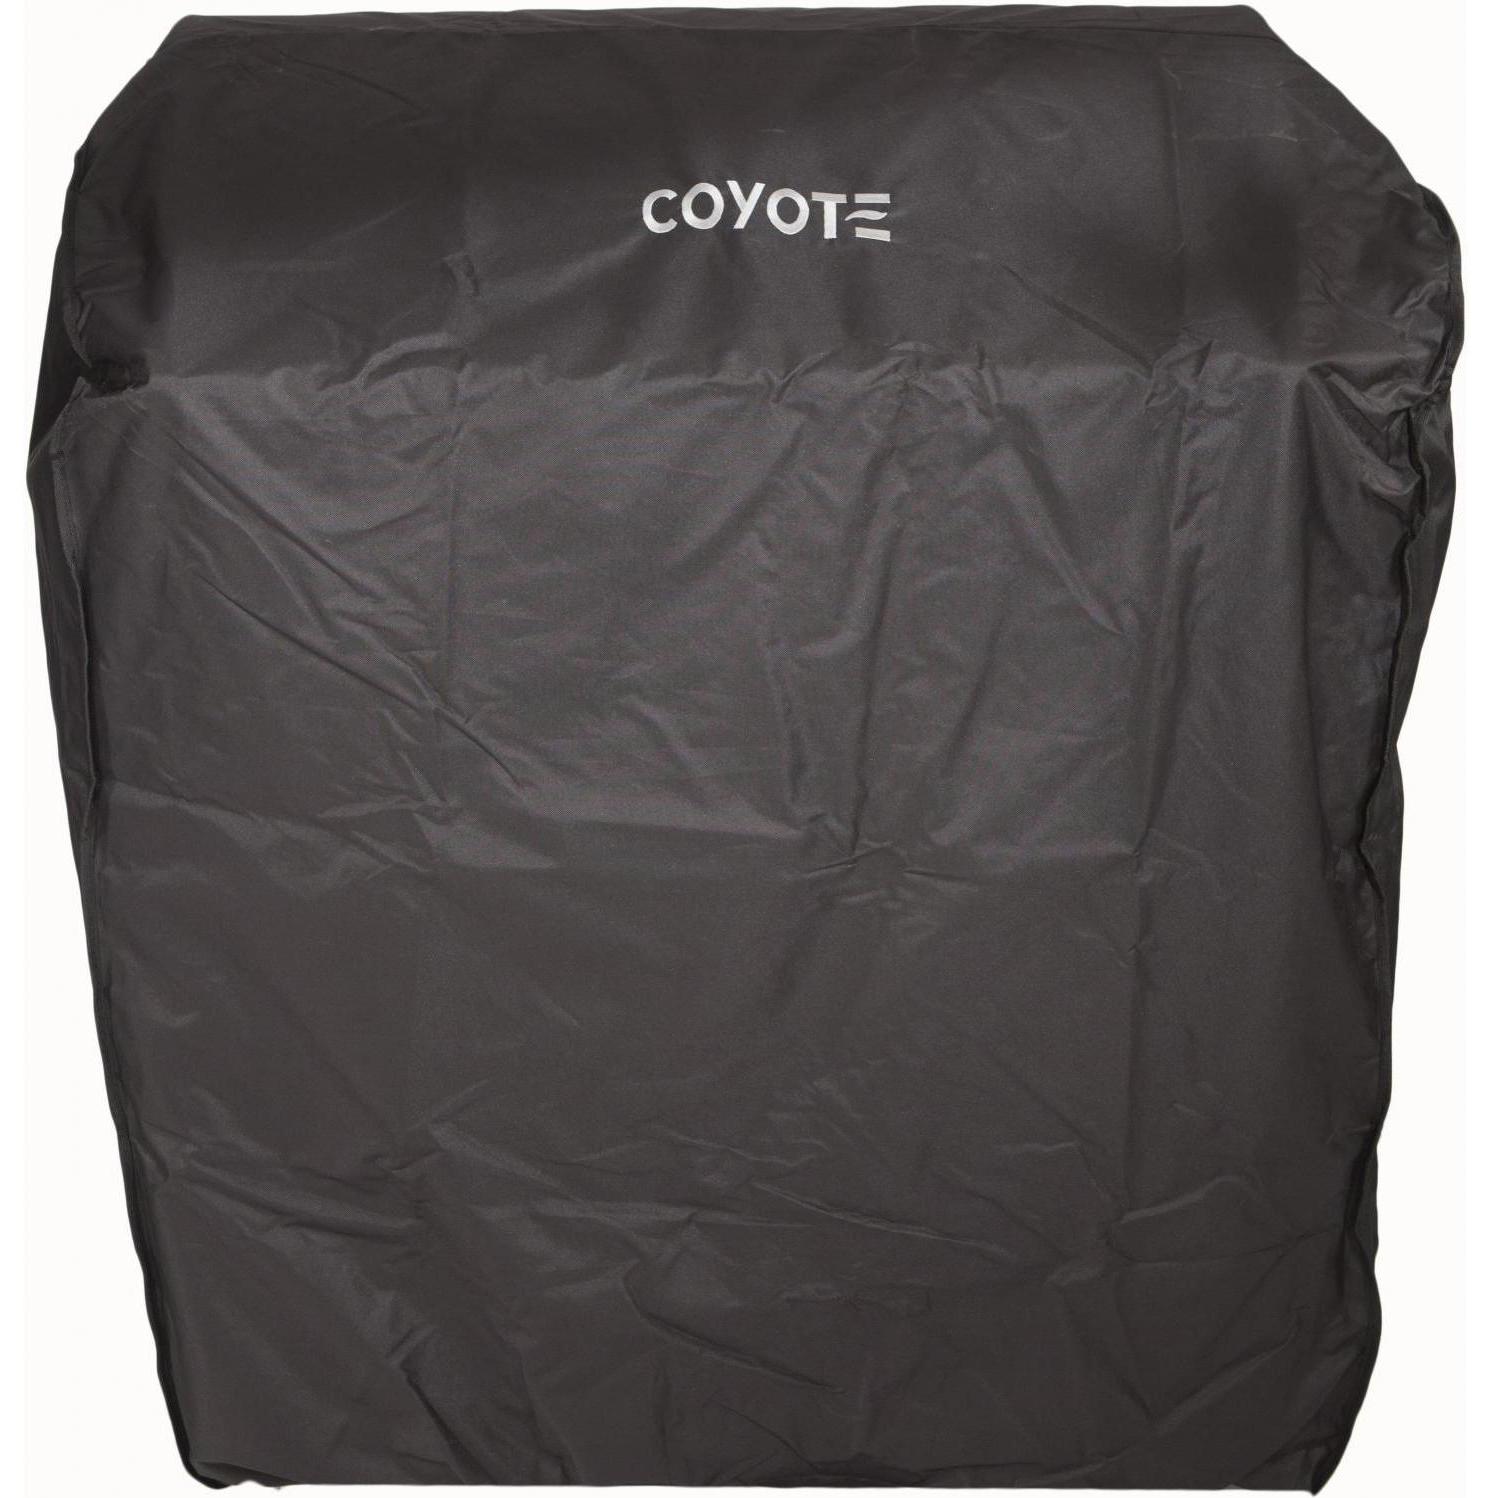 Coyote Outdoor Living 34” Grill Cover-Black